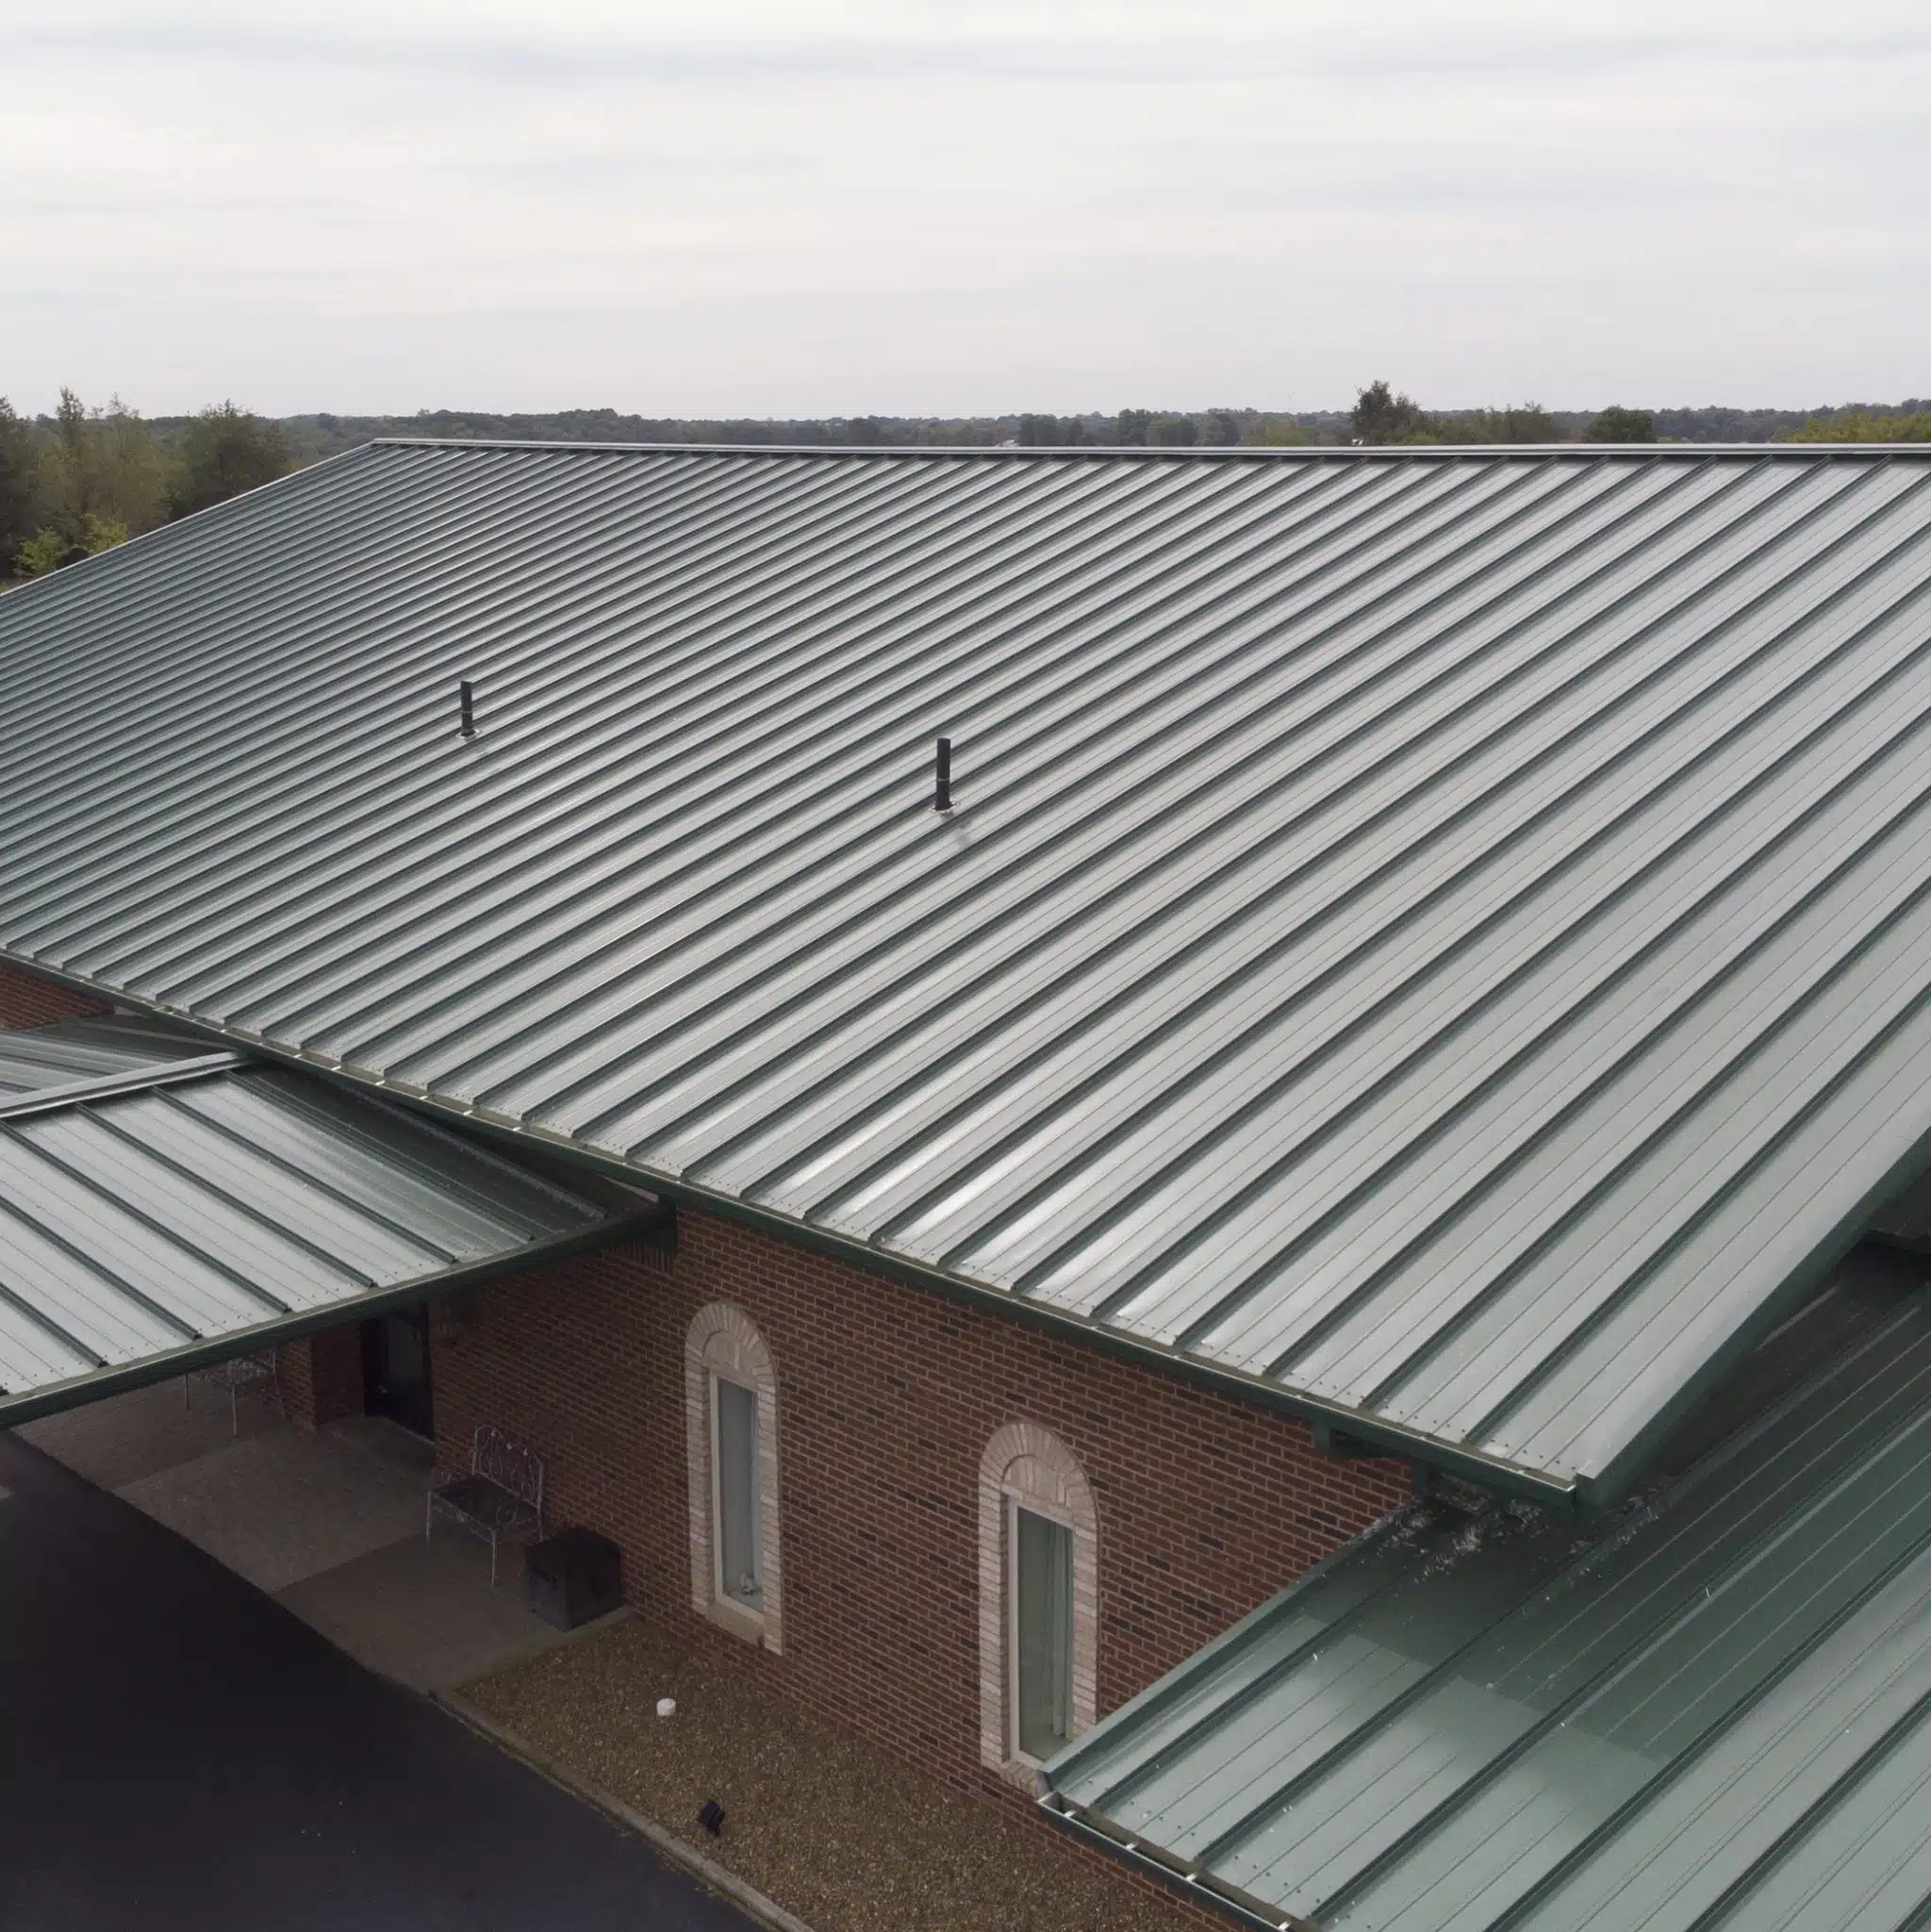 Roof made from Standing Seam Panels